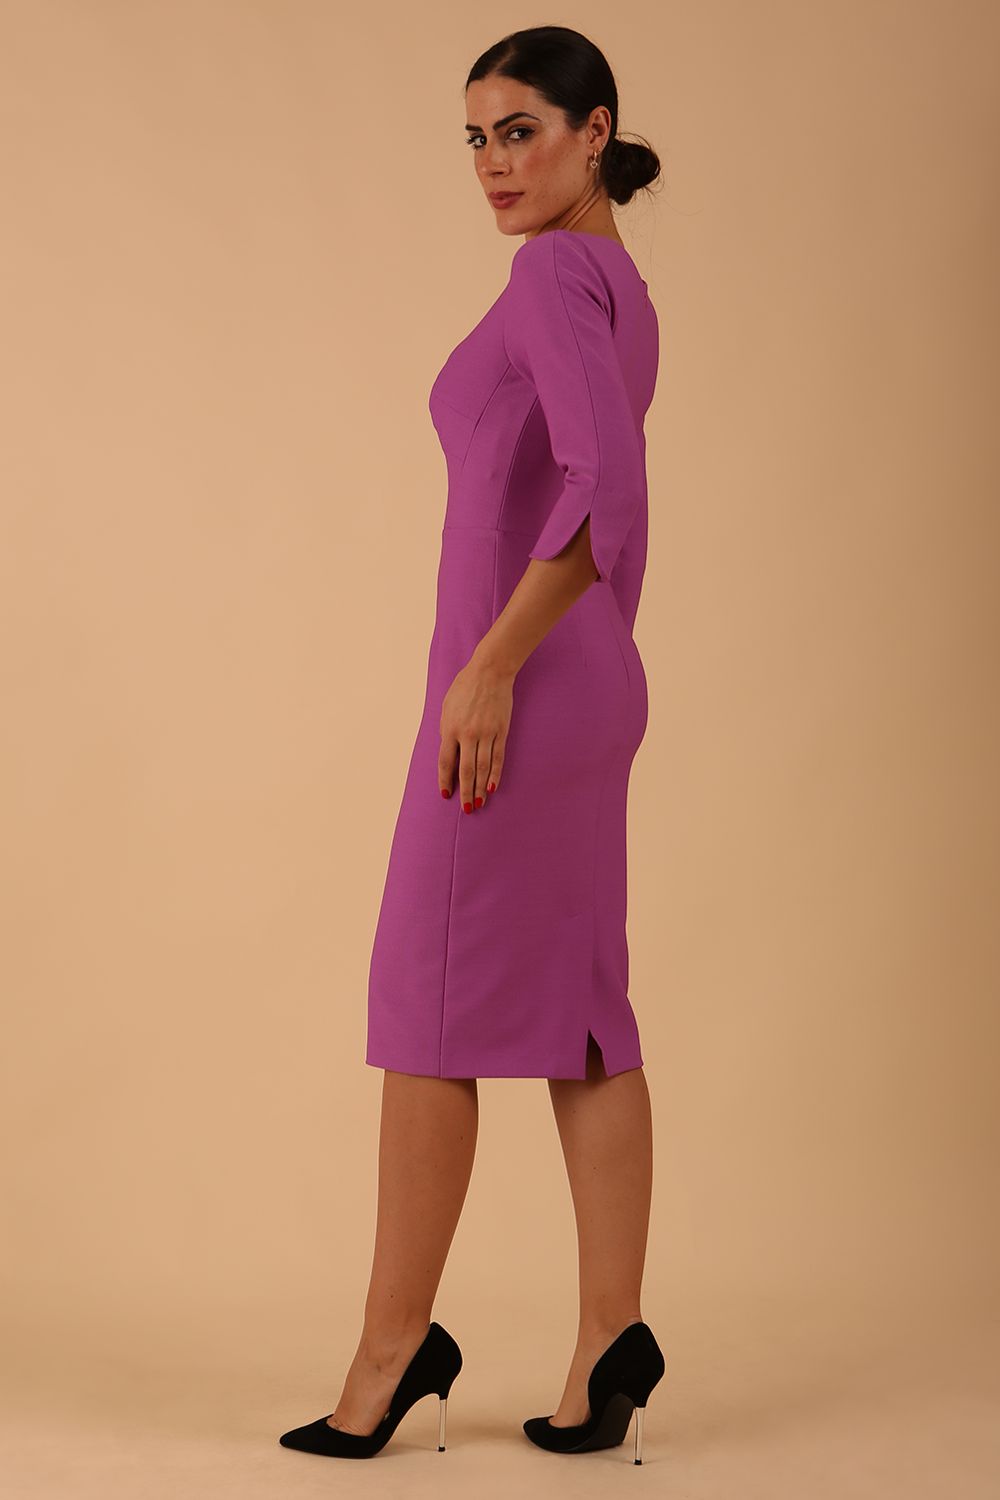 model wearing seed couture zara pencil skirt dress with asymmetric neckline with sleeves in magenta mist colour